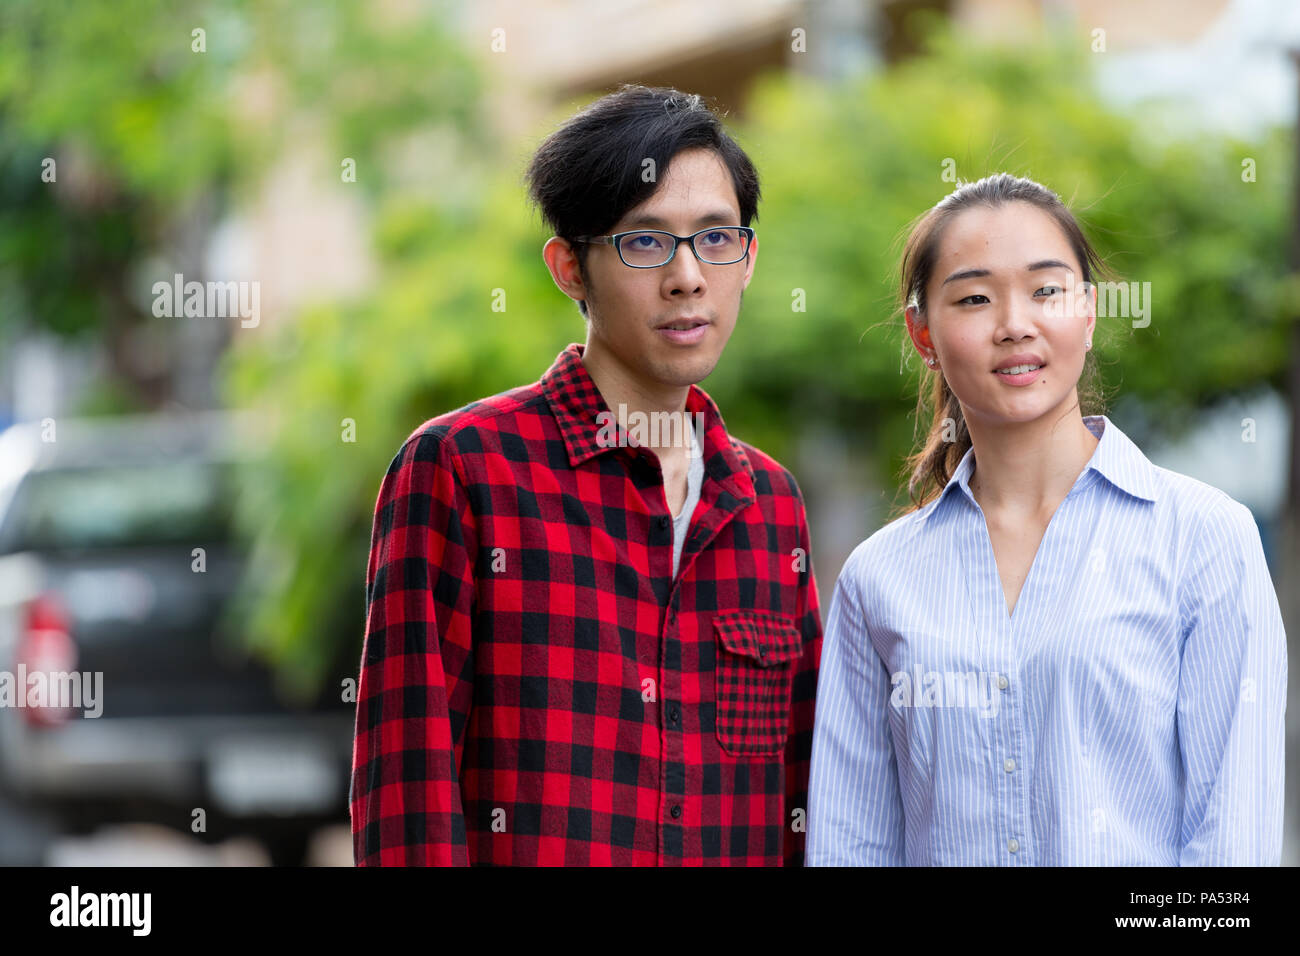 Young Asian couple outdoors Banque D'Images